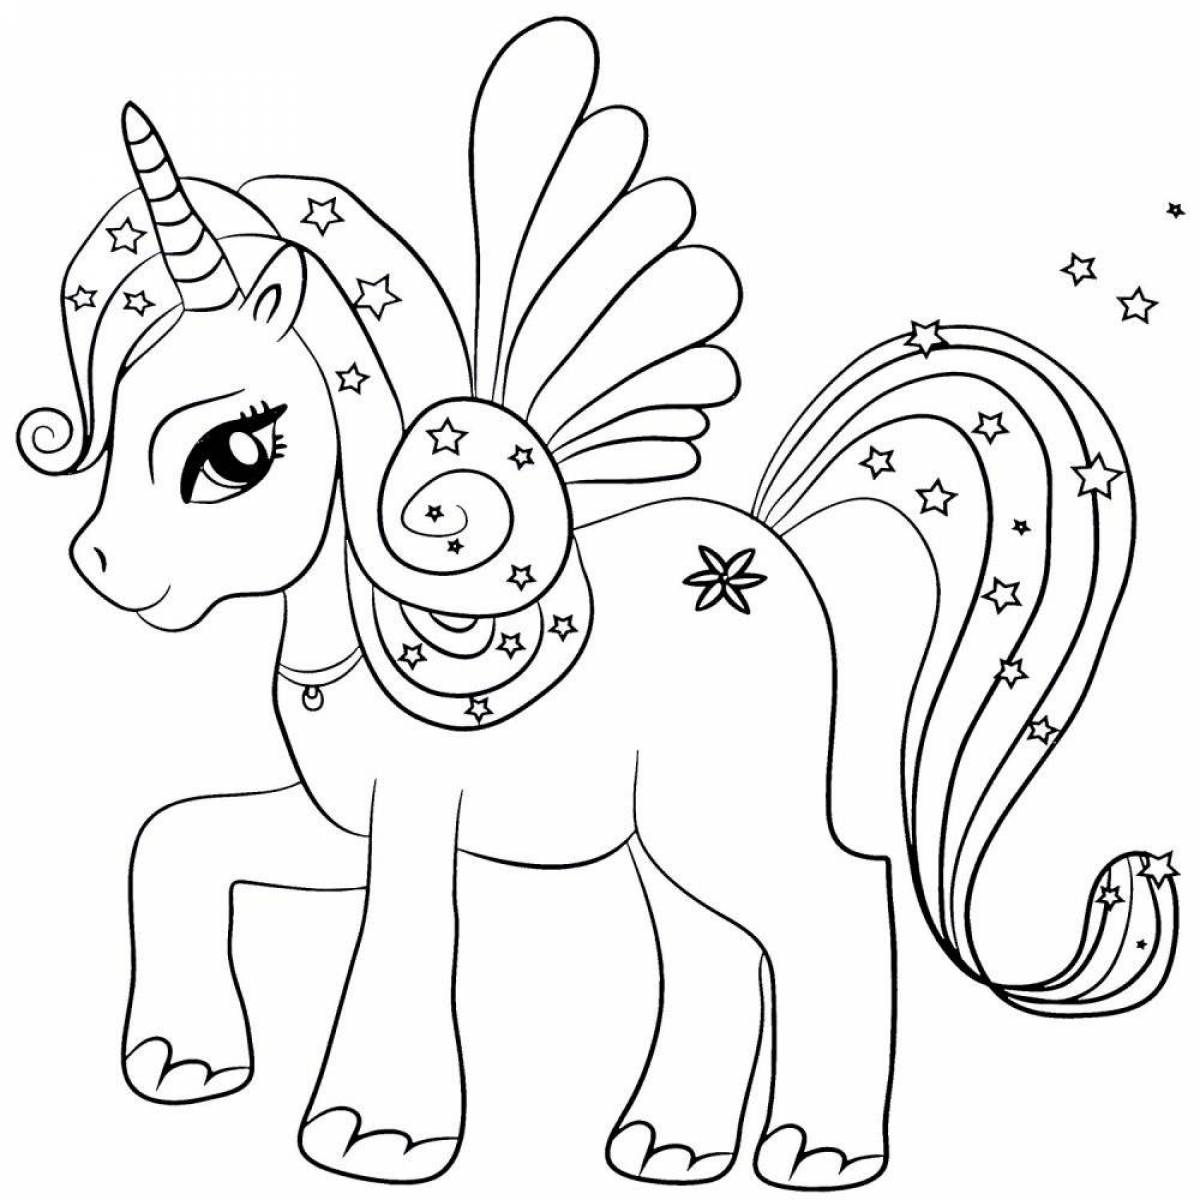 Radiant unicorn coloring book for kids 3-4 years old